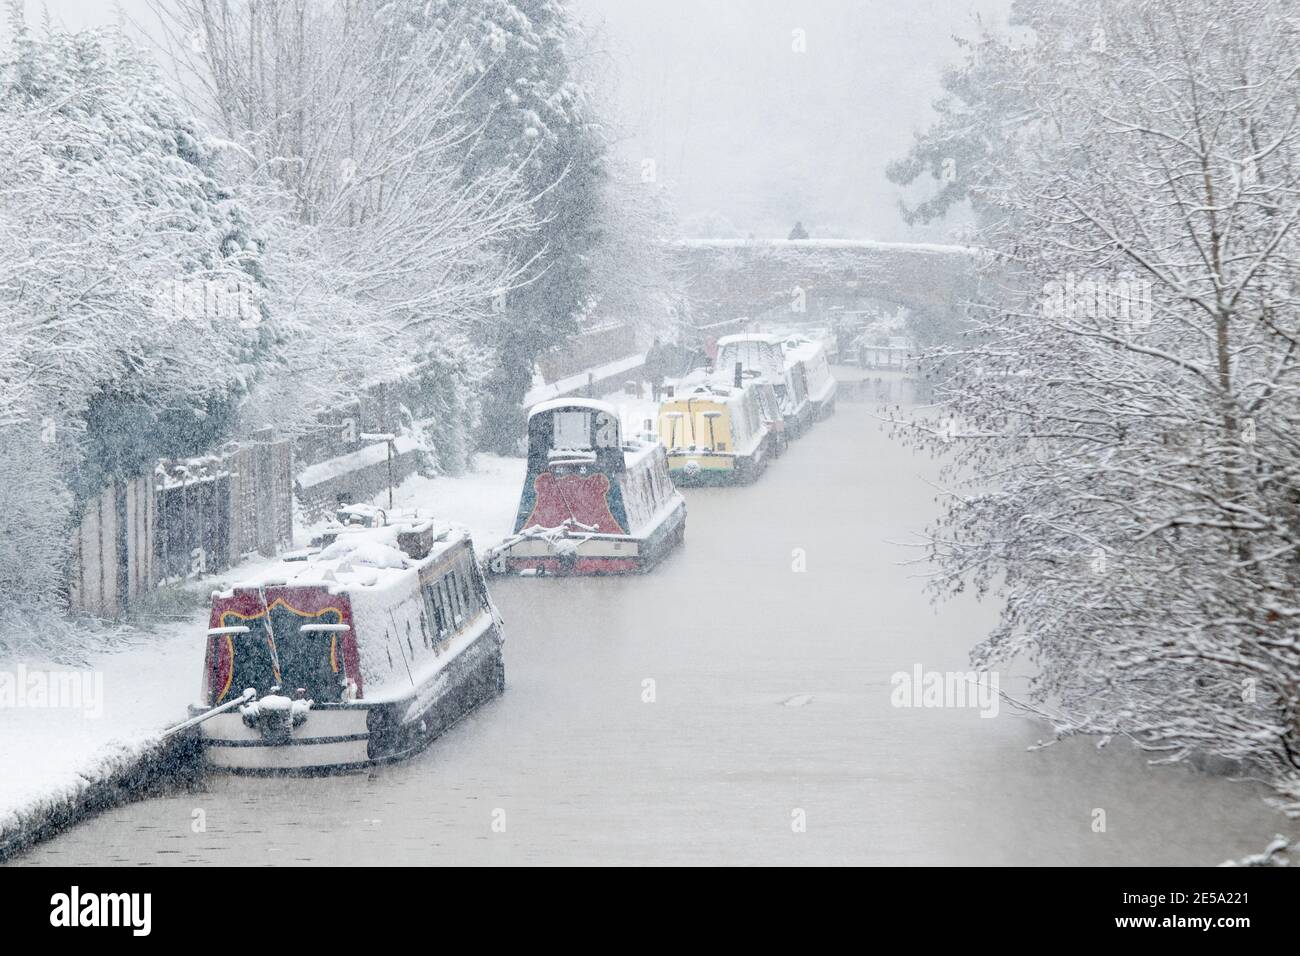 The snow covered scene along the Coventry canal near Atherstone, North Warwickshire. Stock Photo